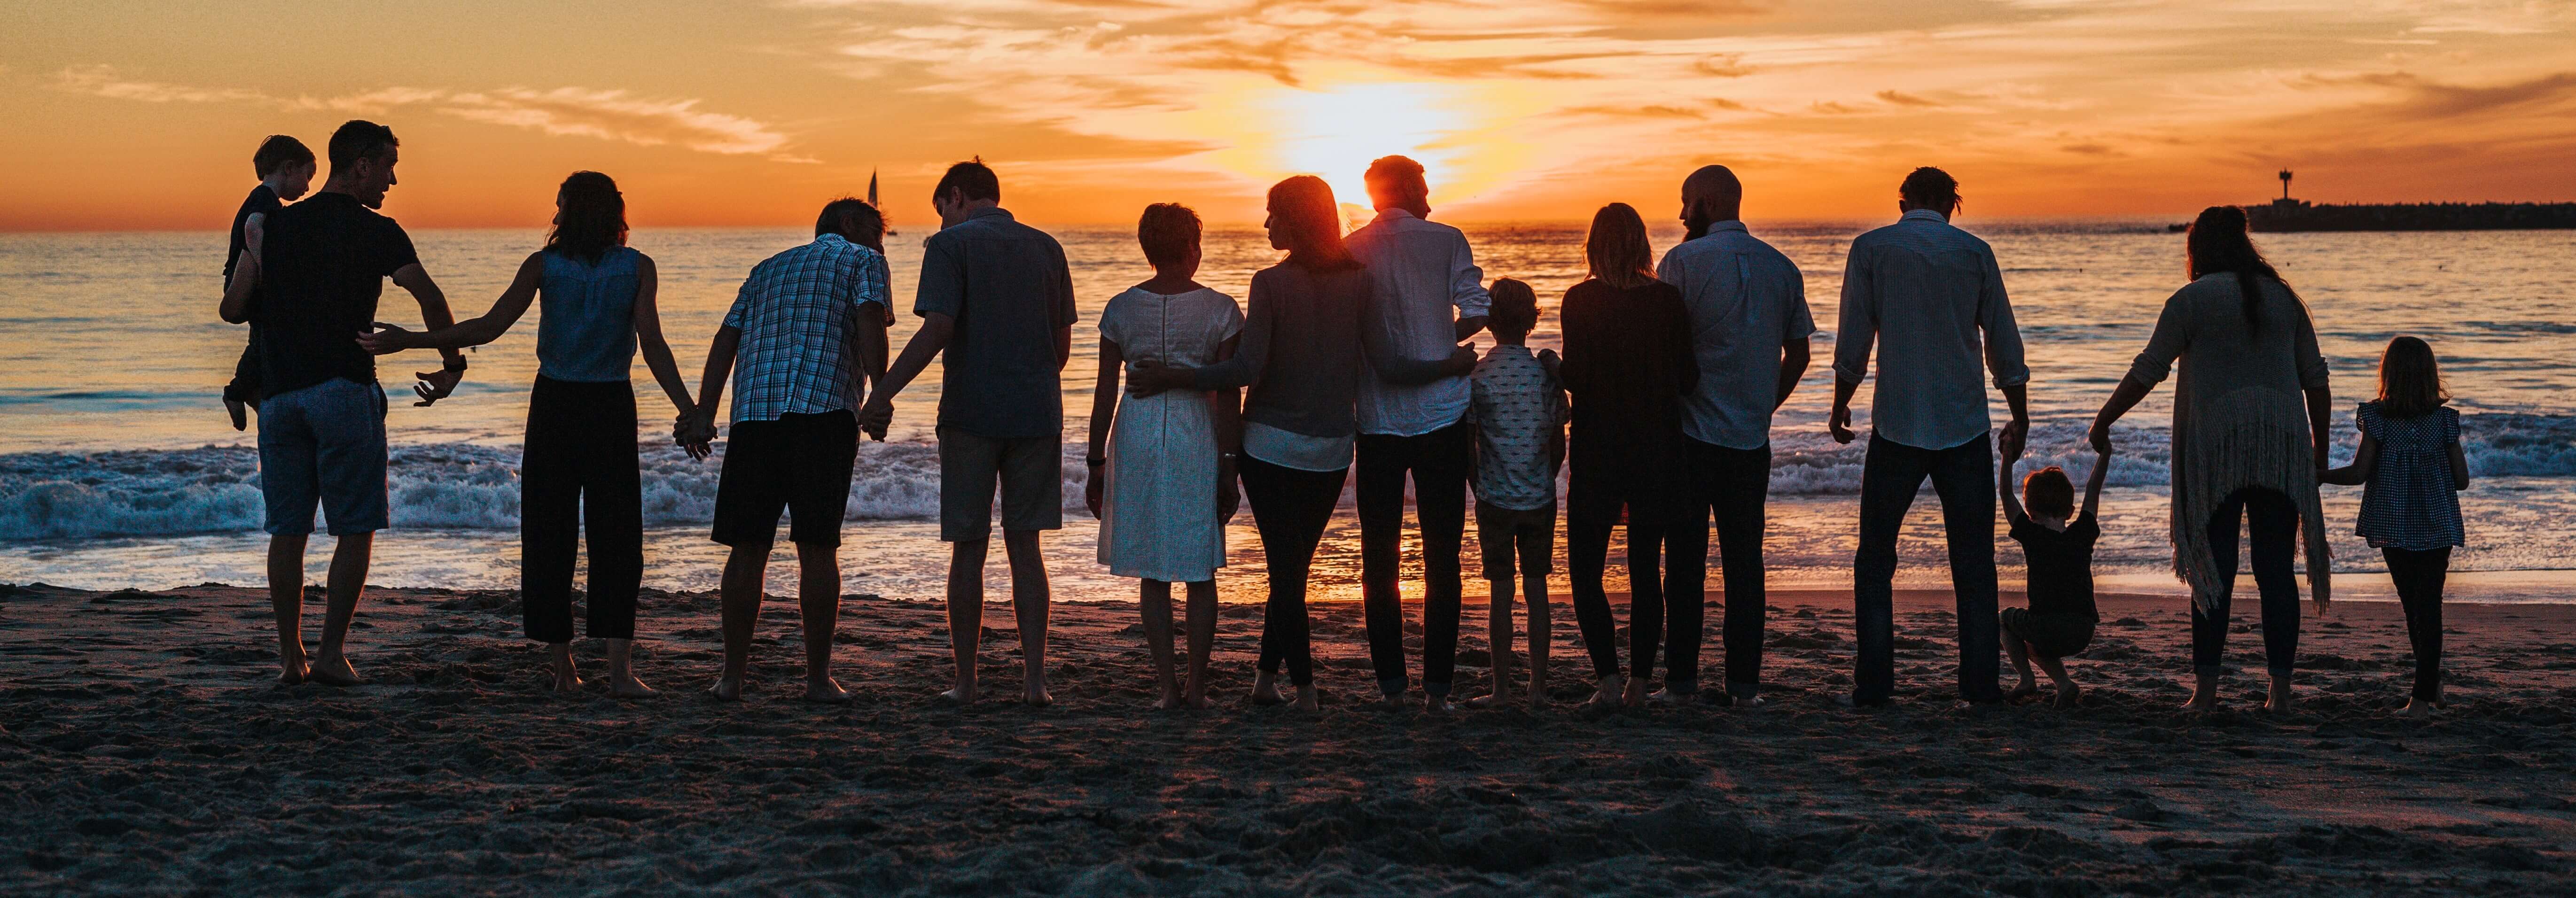 Family sunset cropped sky